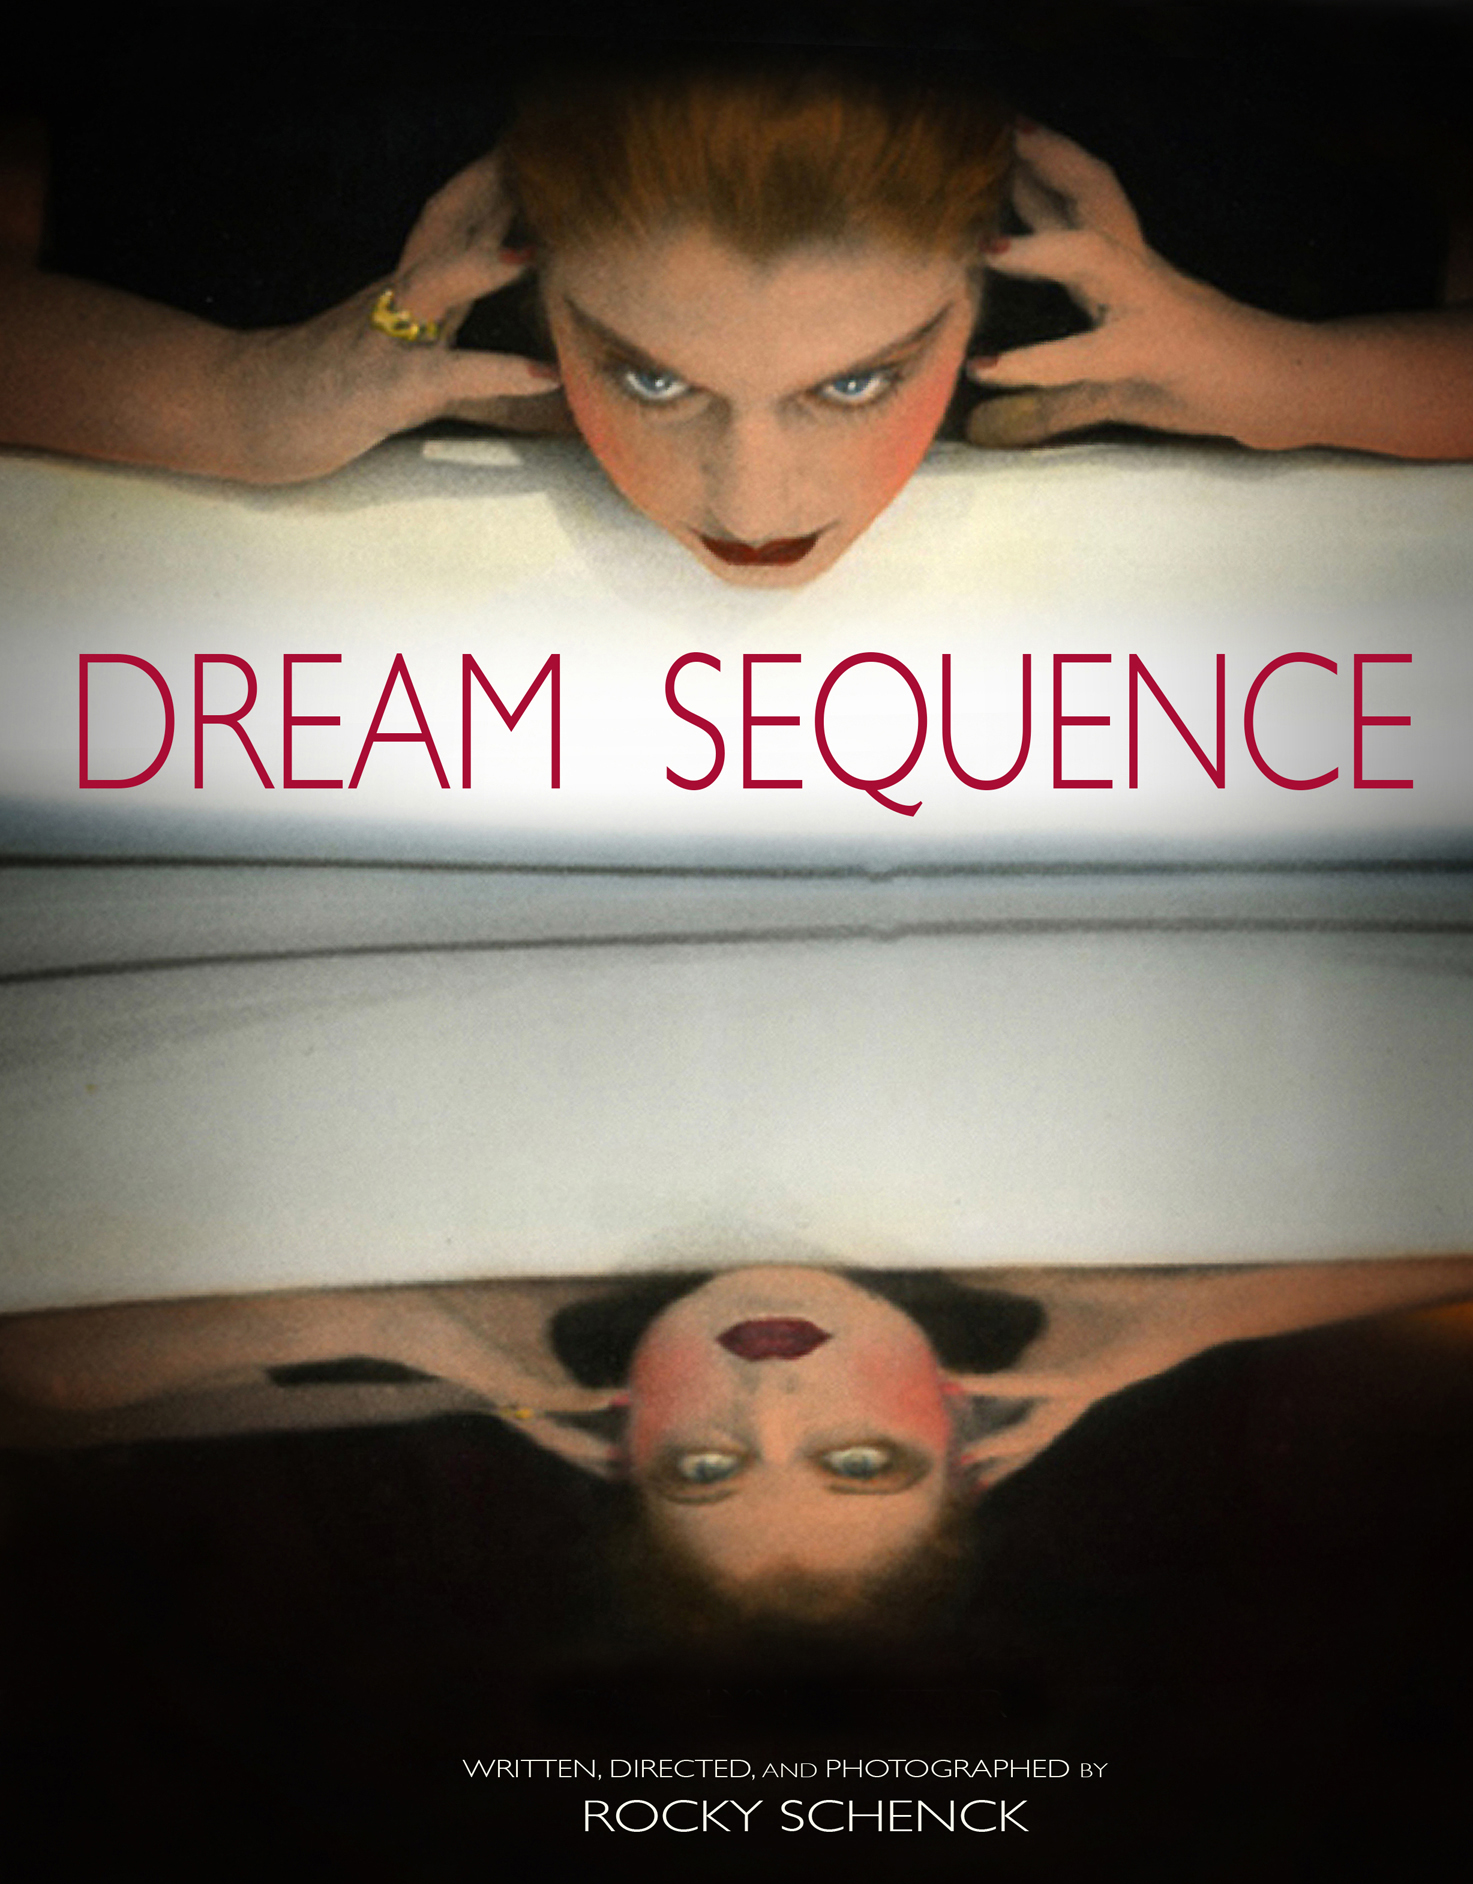 Dream Sequence, a short film  written, directed, and photographed by Rocky Schenck.  Starring Carolyn Meltzer.